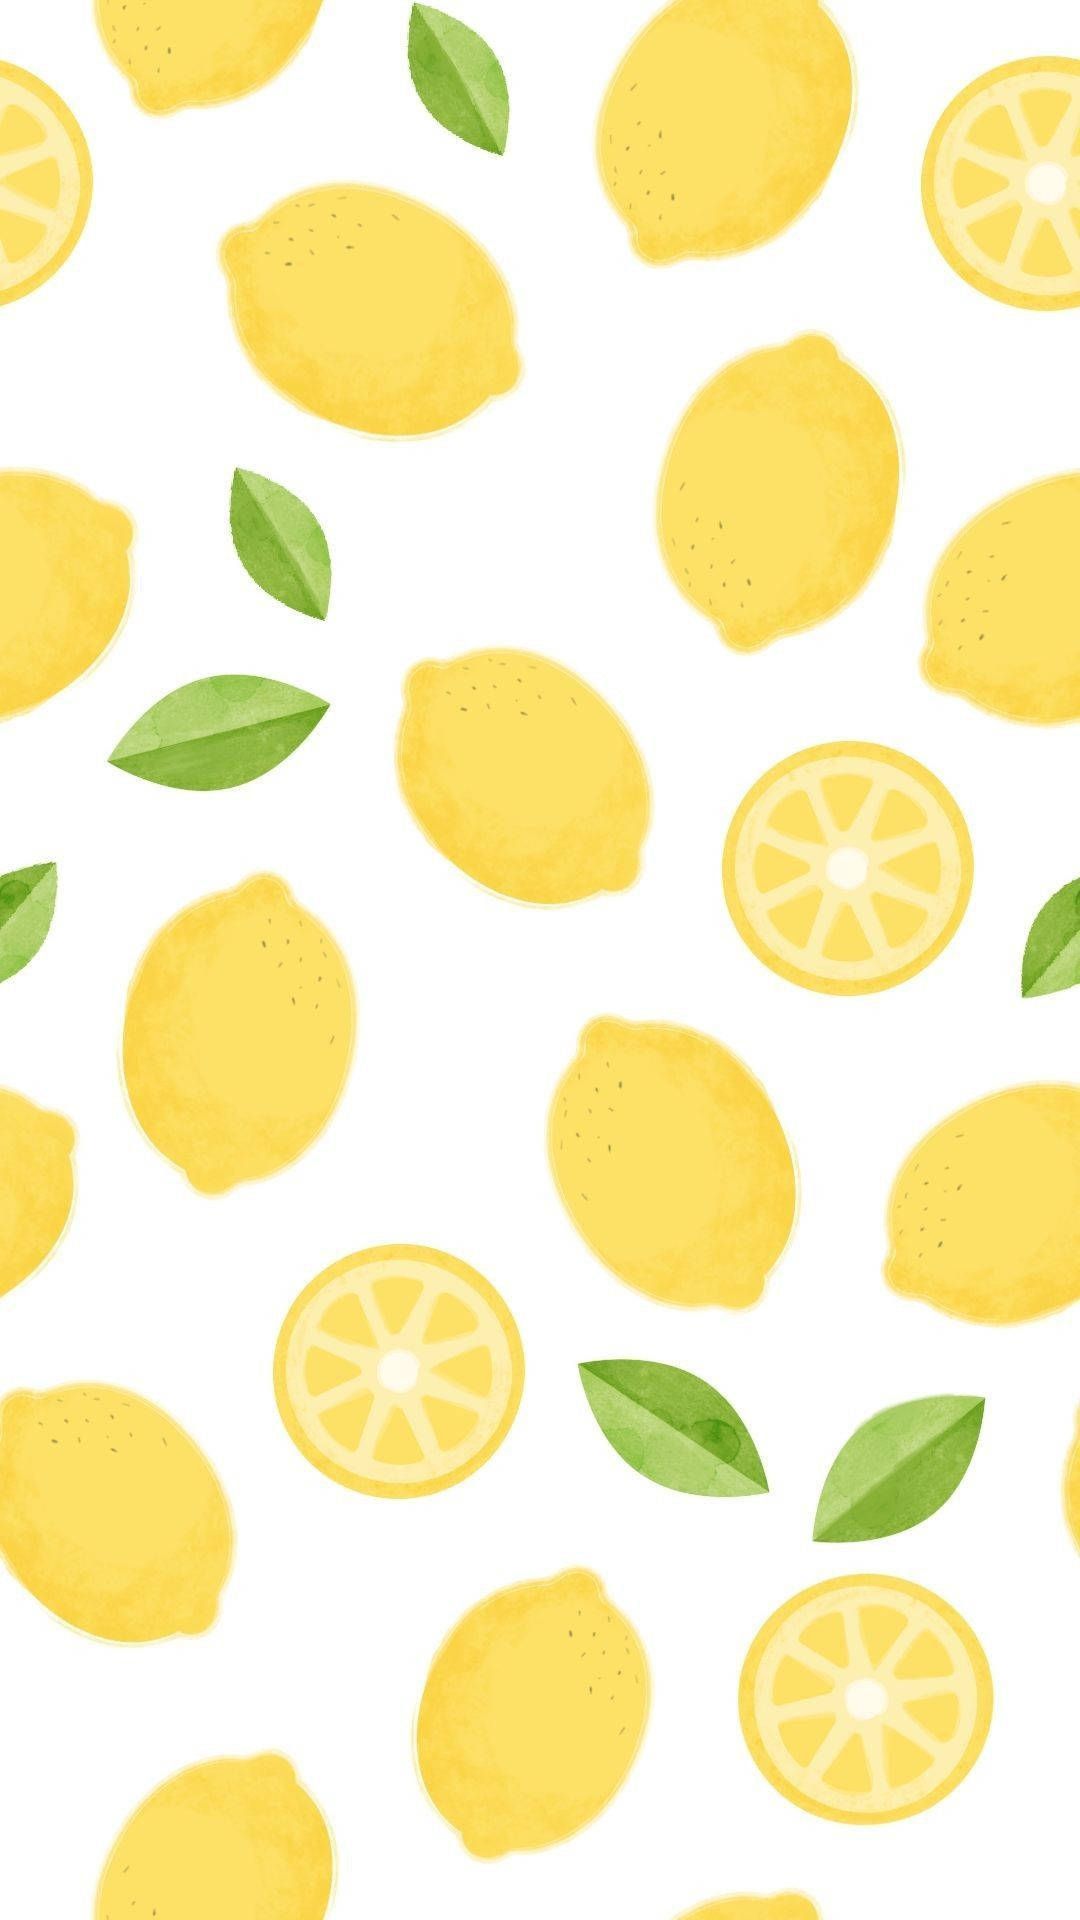 IPhone Wallpaper Lemon with high-resolution 1080x1920 pixel. You can use this wallpaper for your iPhone 5, 6, 7, 8, X, XS, XR backgrounds, Mobile Screensaver, or iPad Lock Screen - Lemon